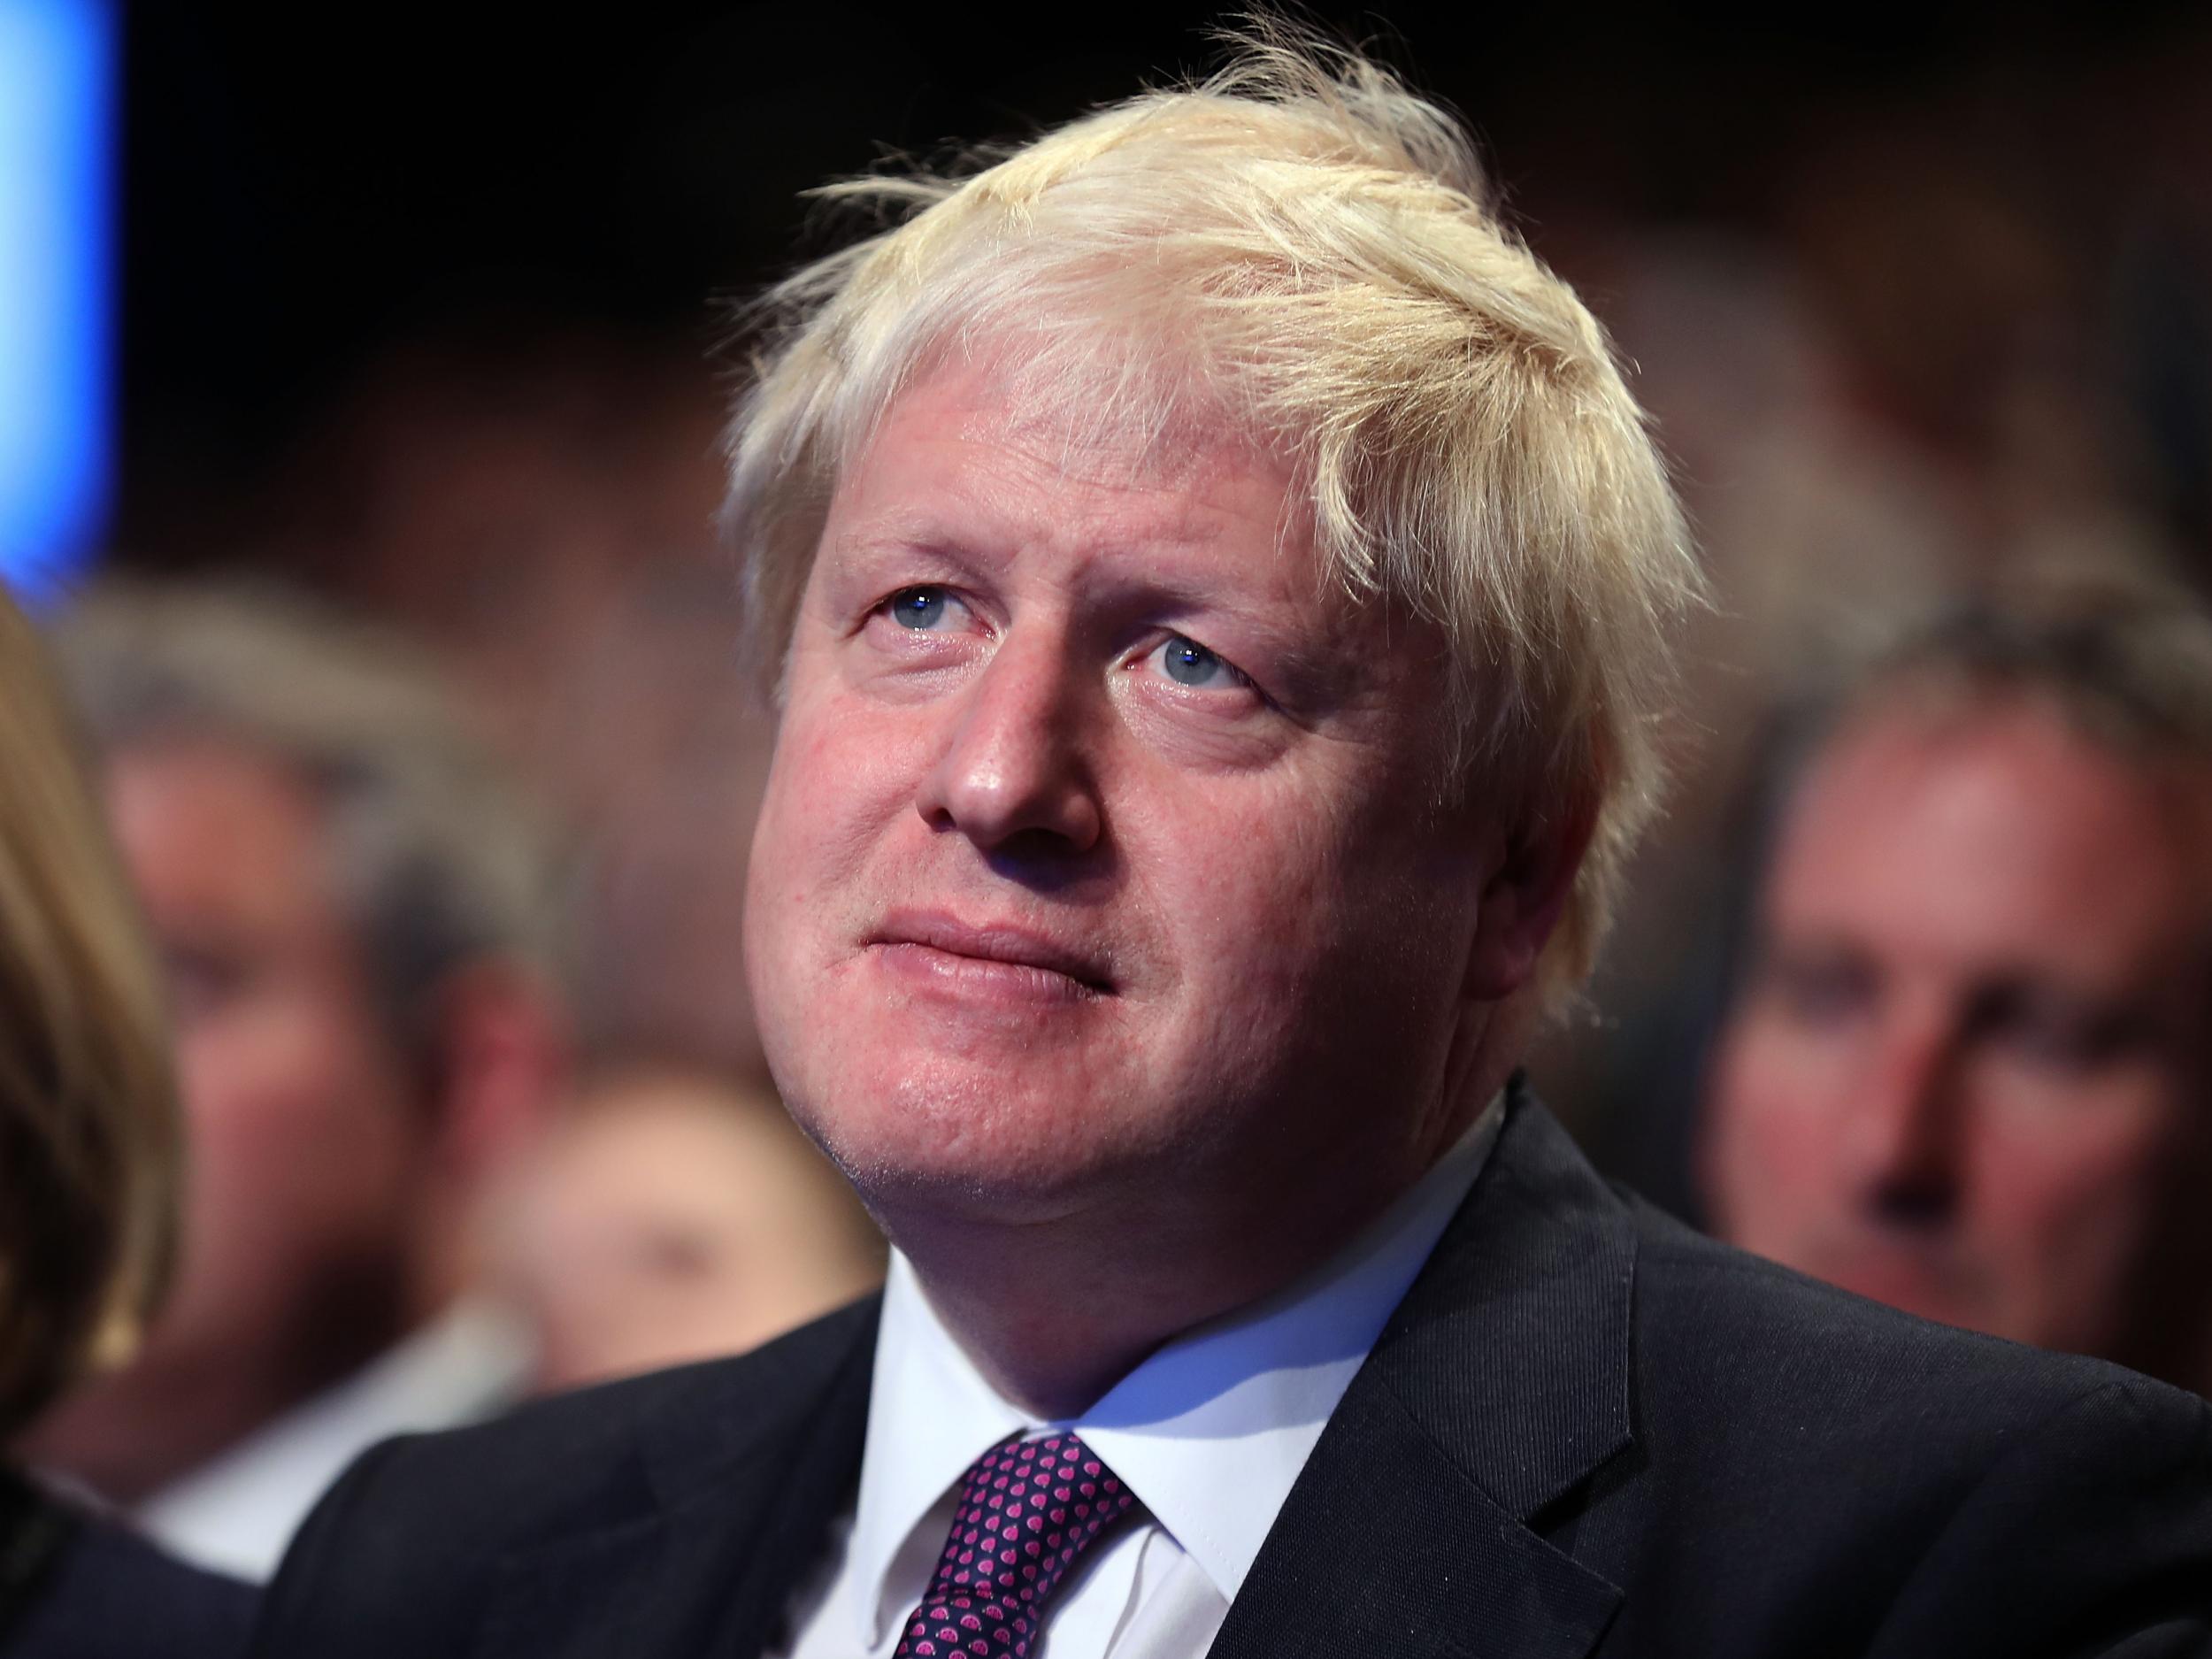 Utterly nonsense': Number 10 slams claims Boris Johnson will step down in  six months